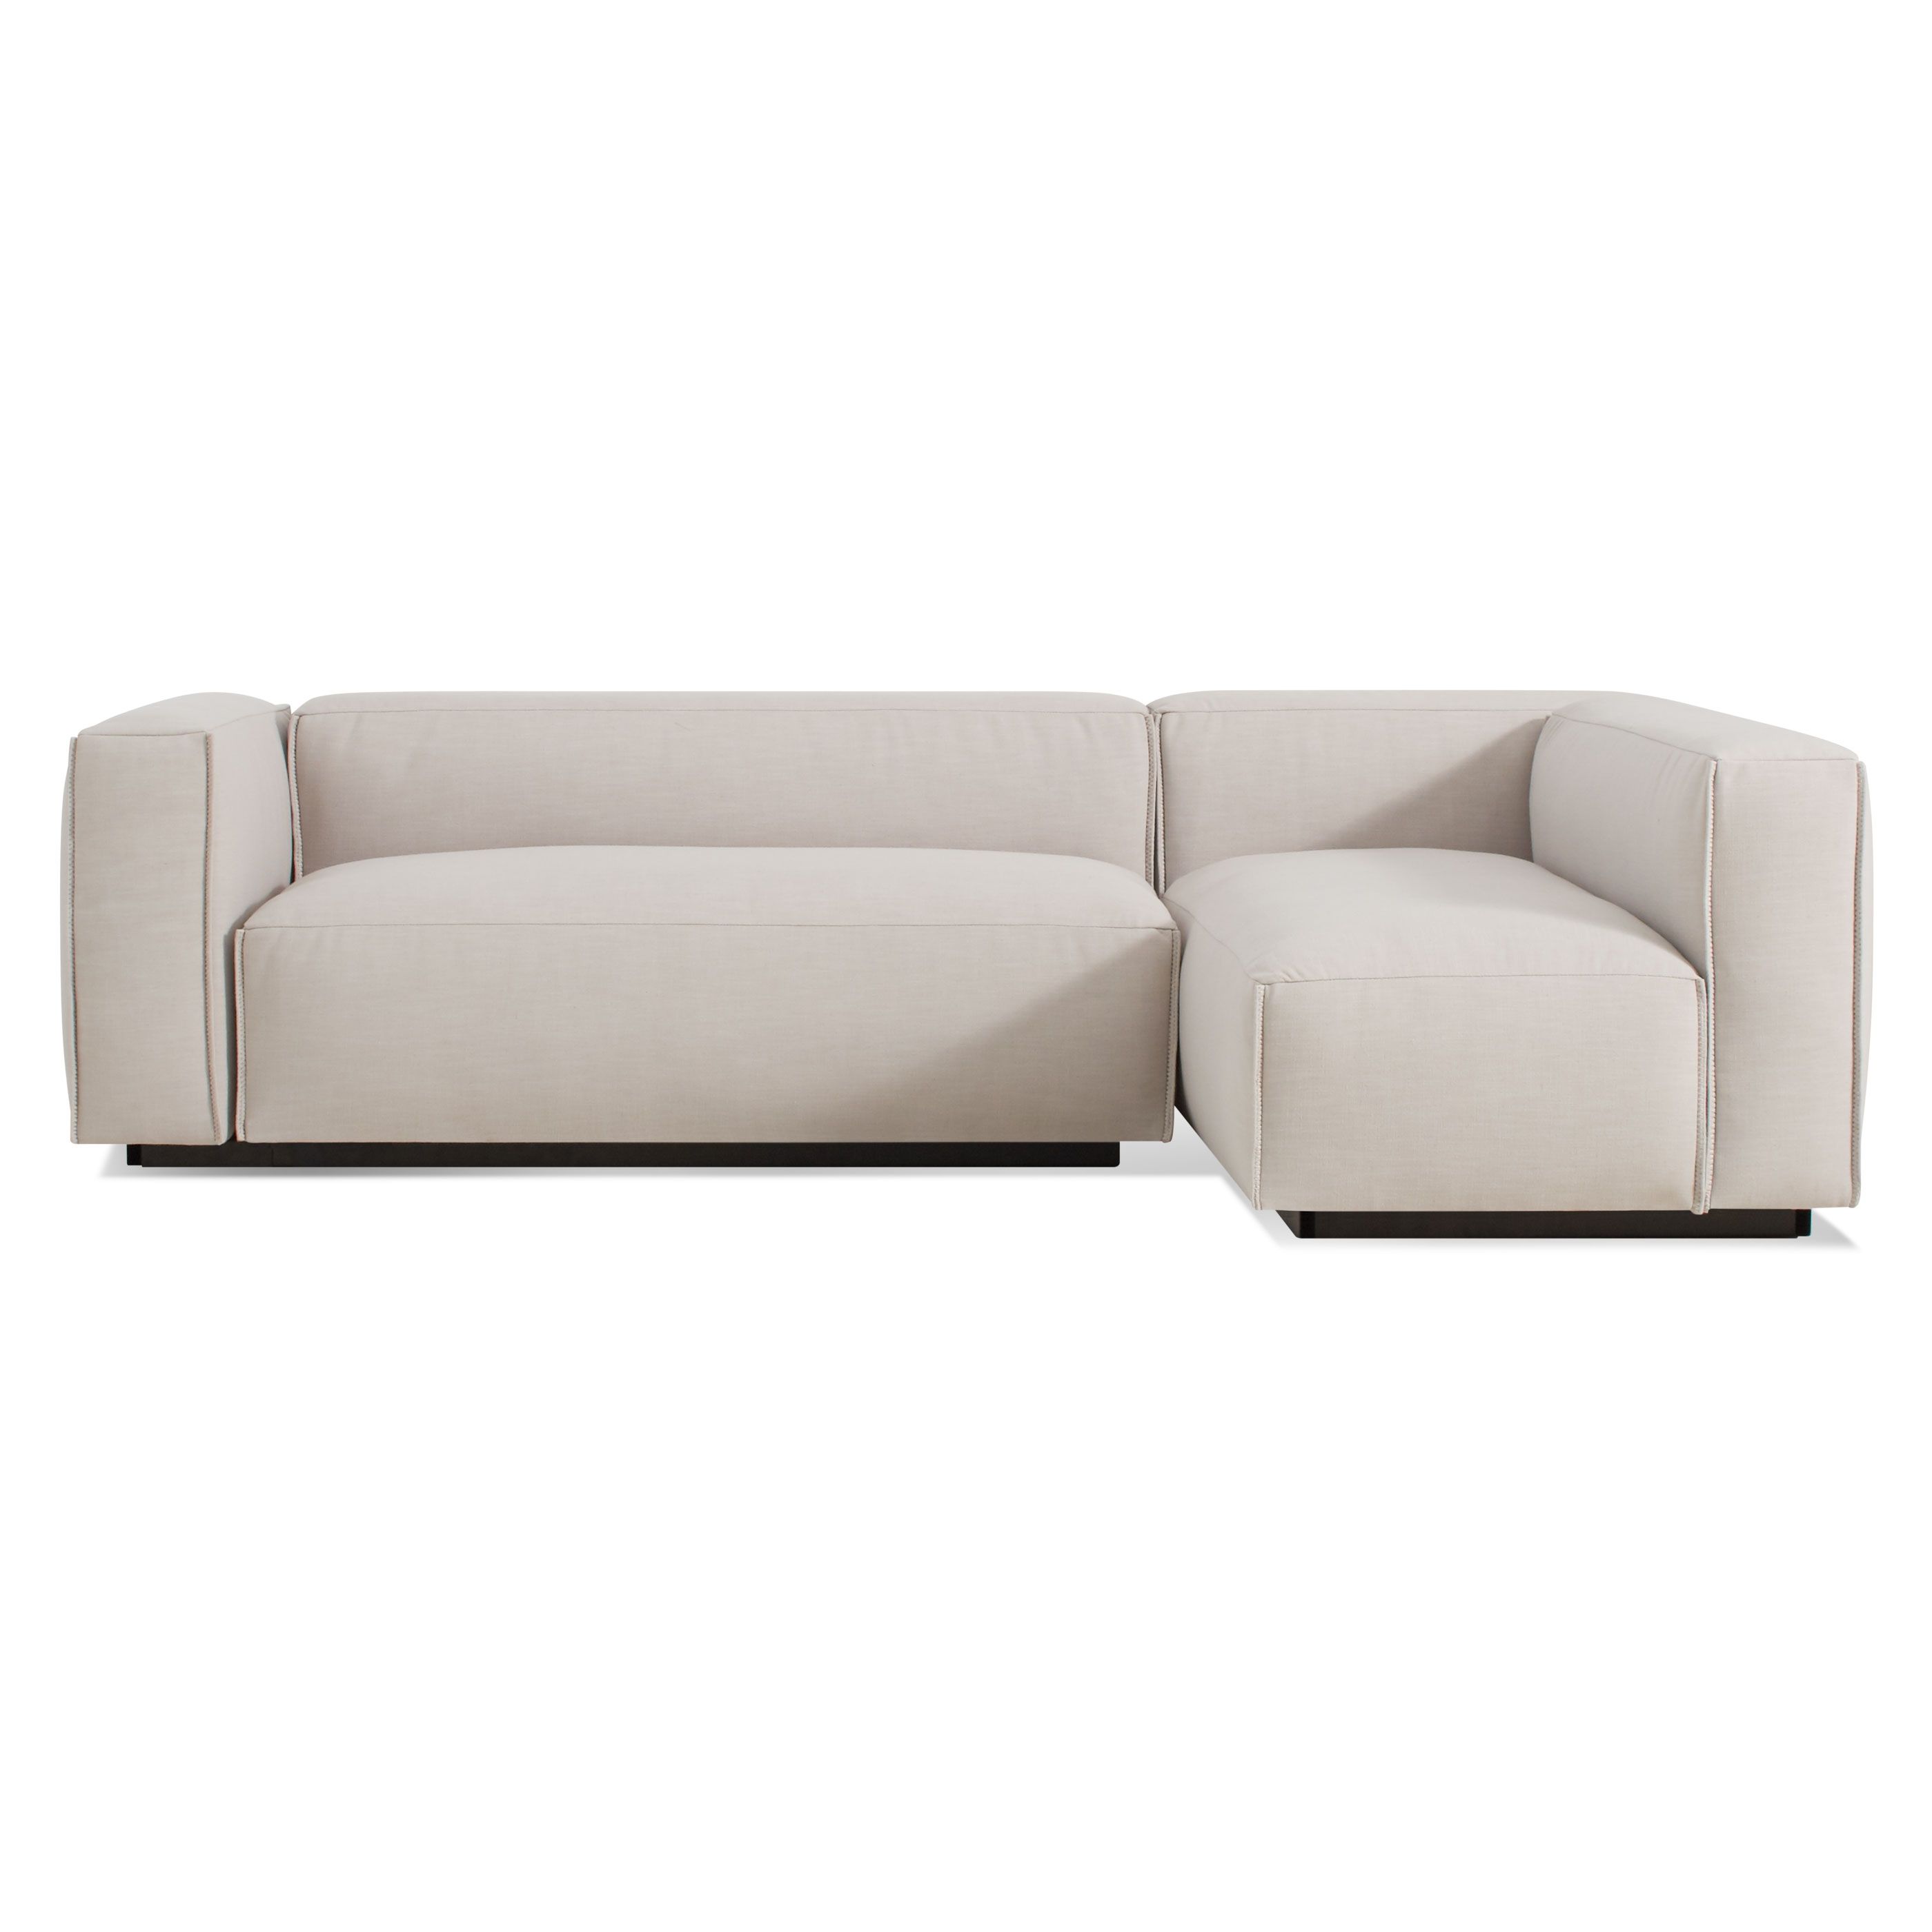 Cleon Small Modern Sectional Sofa Blu Dot Intended For Small Sectional Sofa (View 6 of 12)